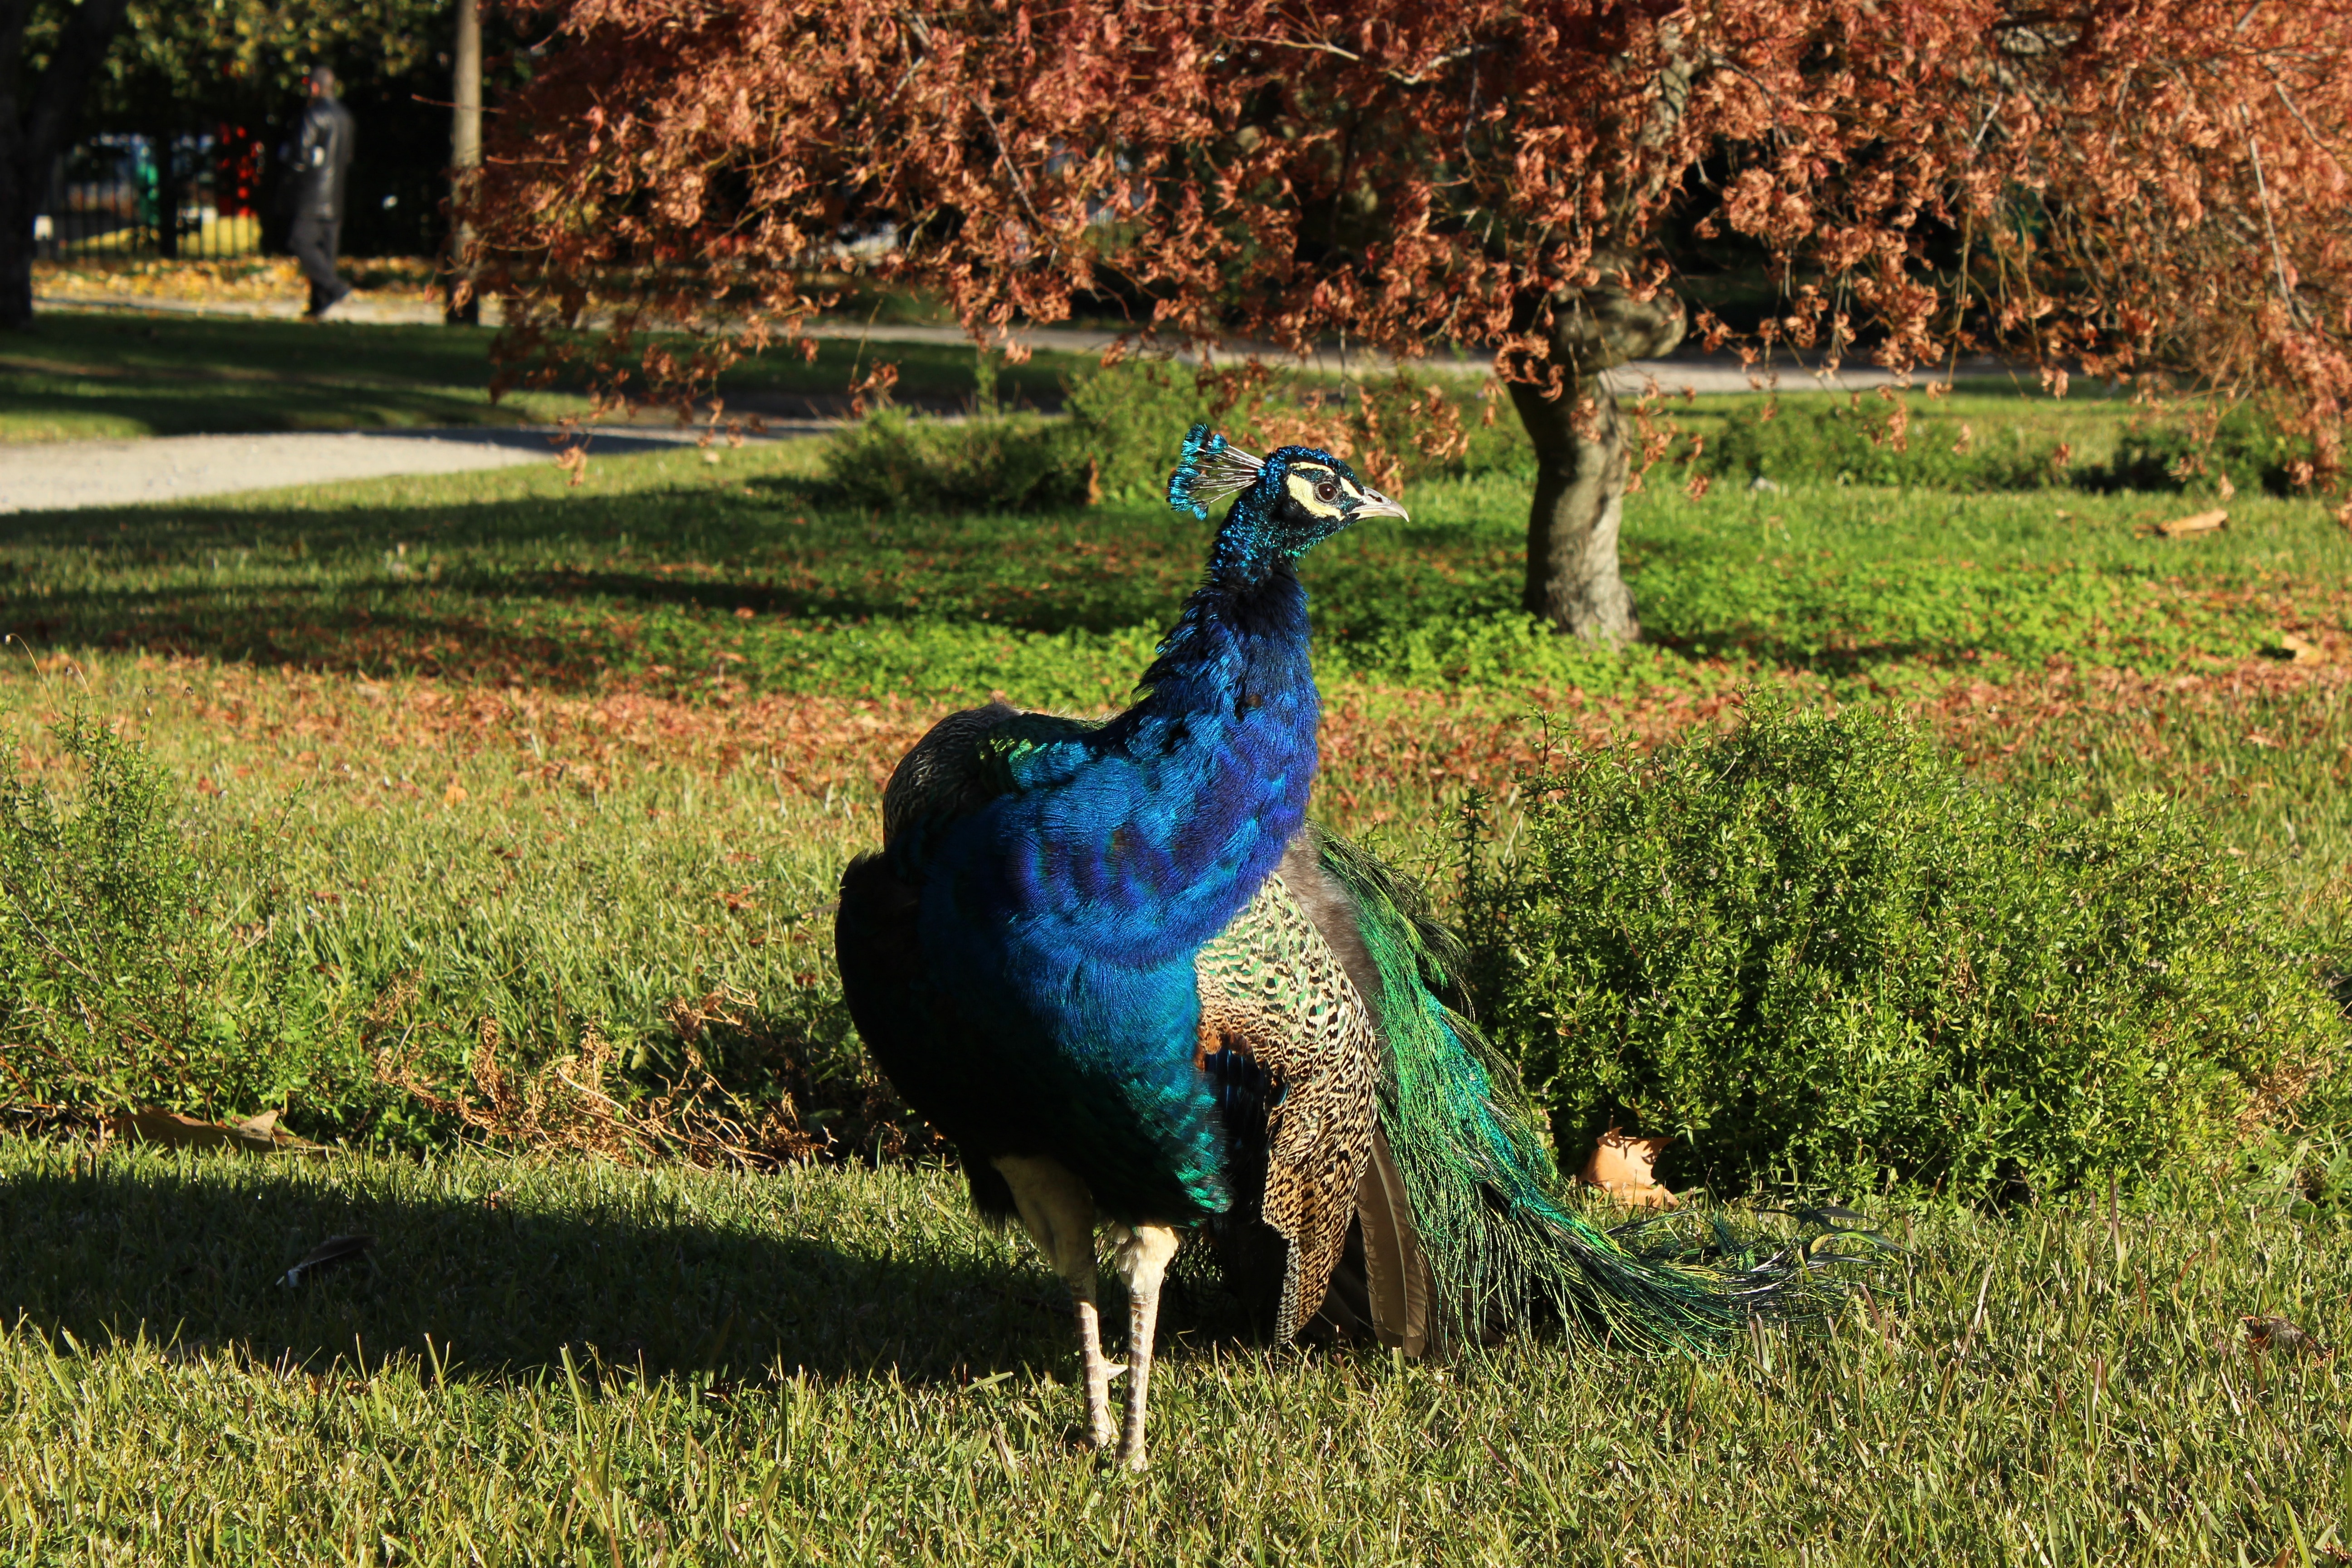 blue-green-yellow peacock on green grass field during daytime